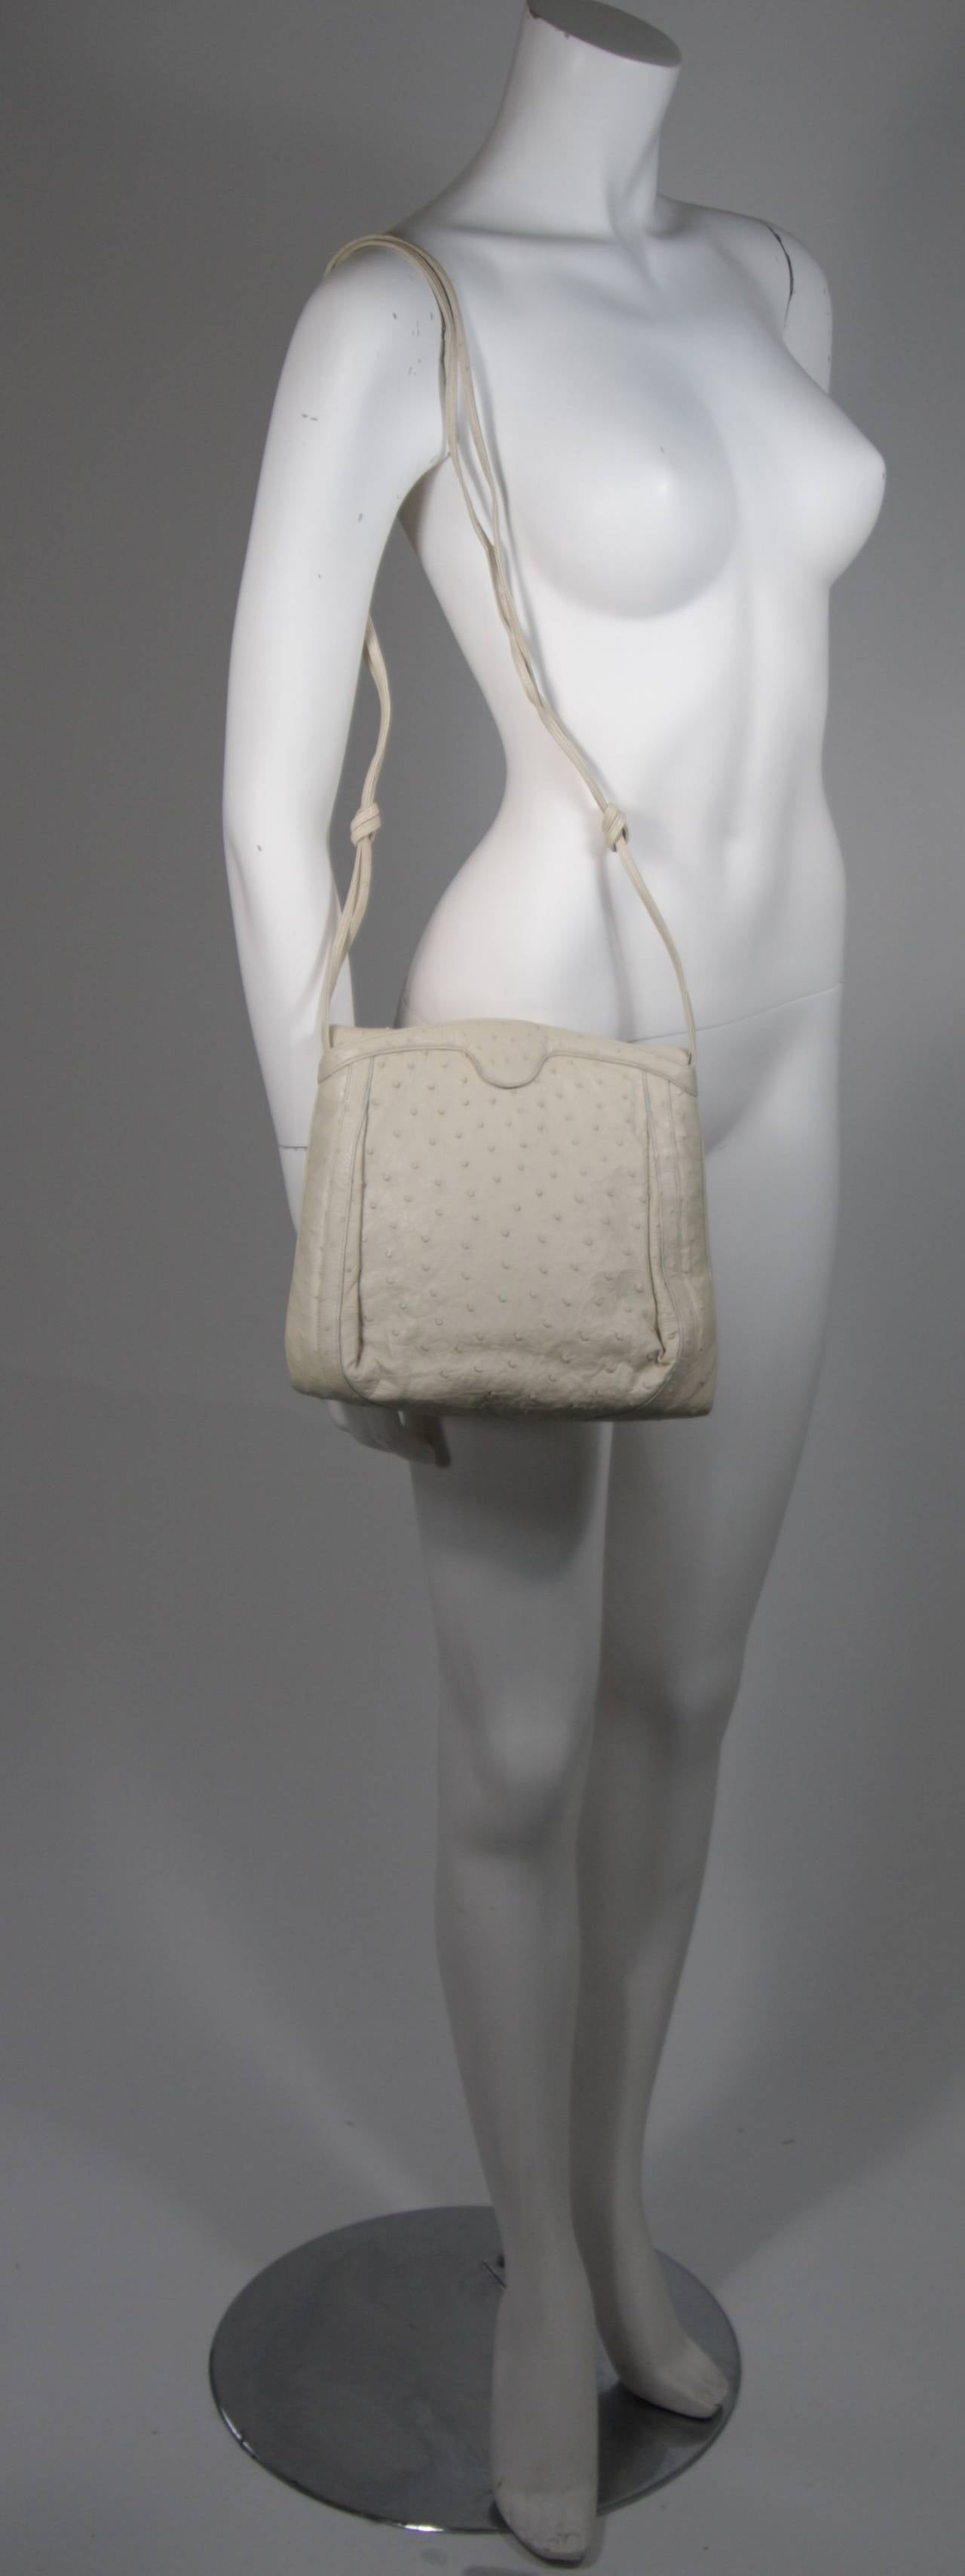 This vintage Judith Leiber is available for viewing at our Beverly Hills Boutique. We offer a large selection of evening gowns and luxury garments.

This handbag is composed of an off-white ostrich skin. There is a magnetic closure and dual